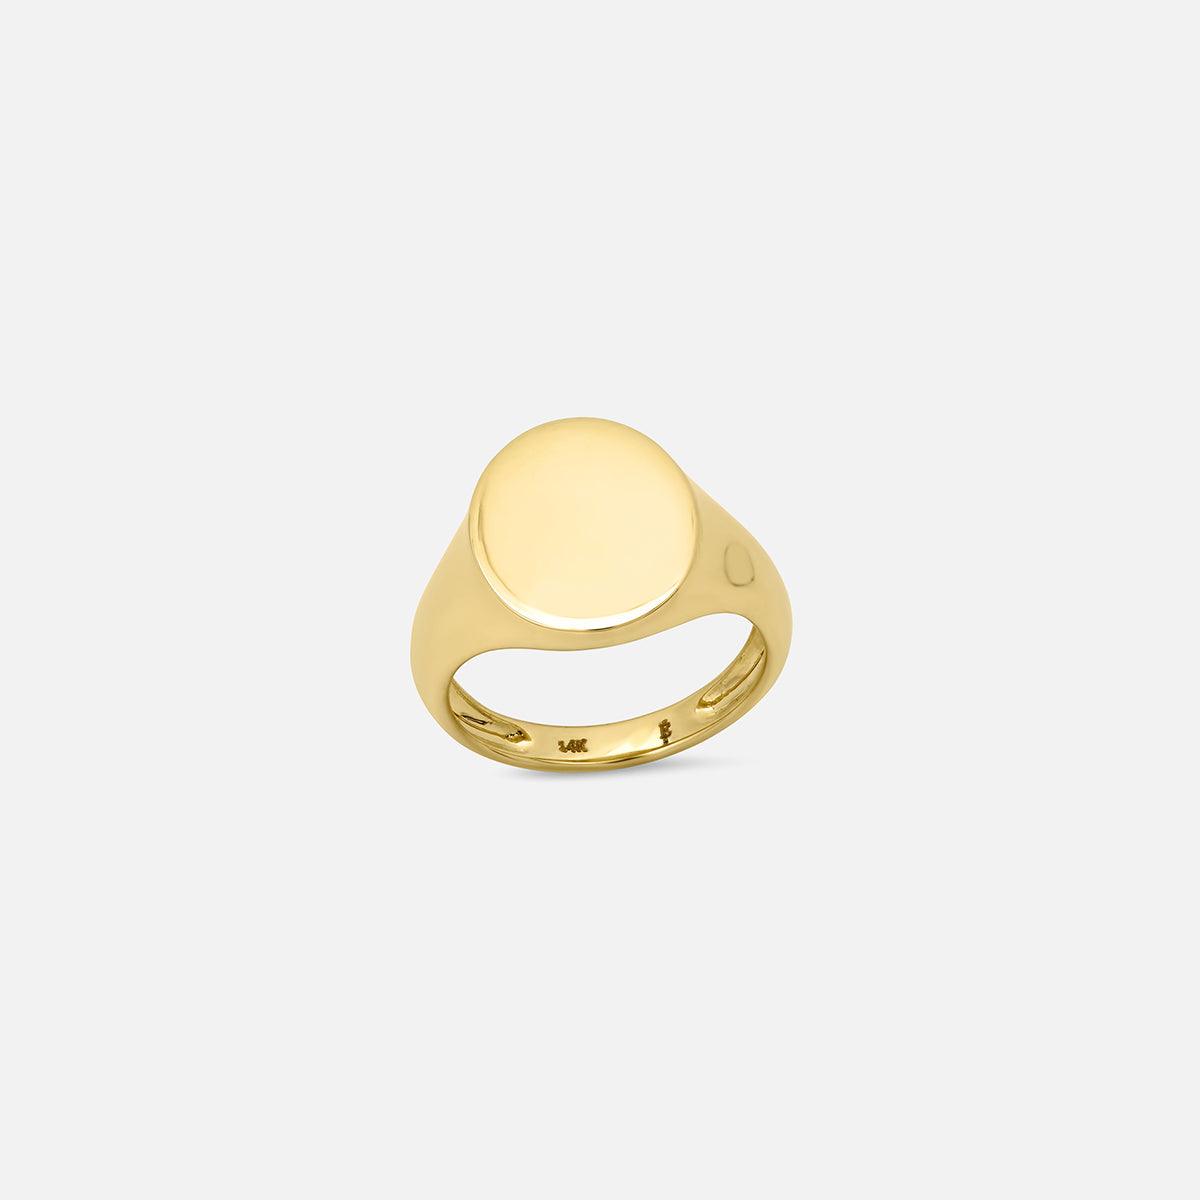 Gold Signet Pinky Ring - At Present